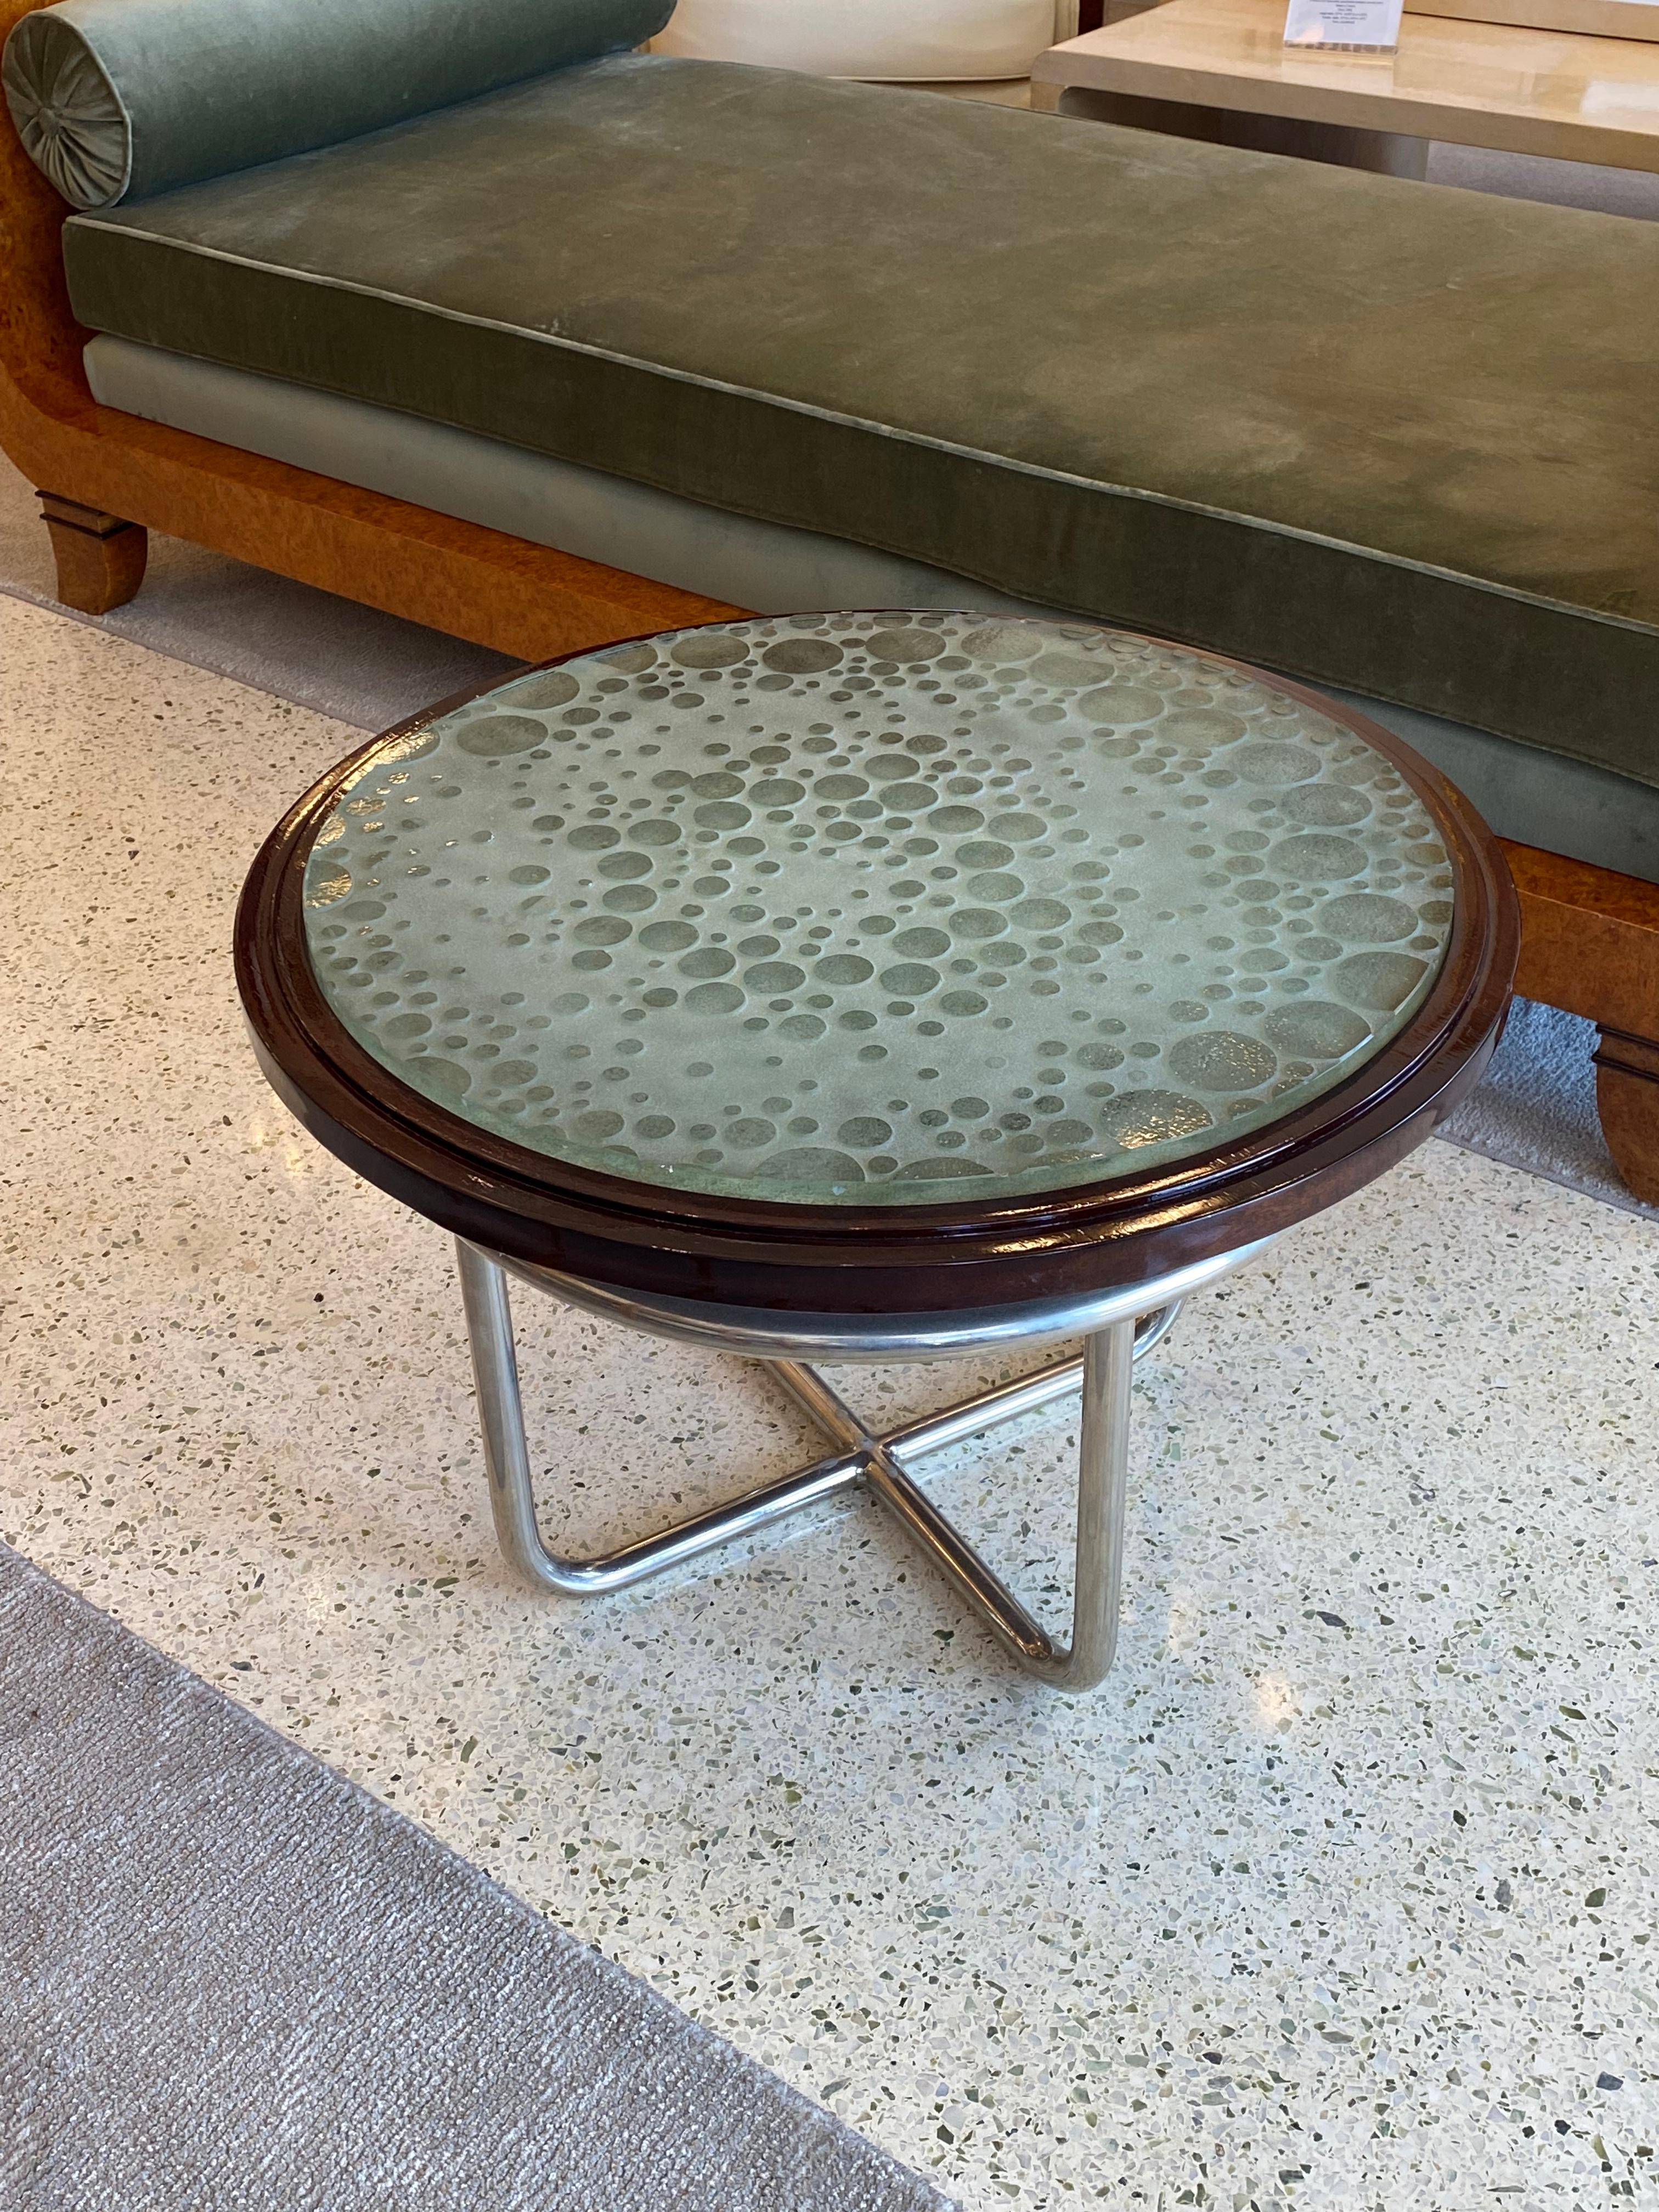 Art Deco Maurice Dufrene modernist coffee table with nickel metal legs and glass top designed by Max Ingrand.
Made in France. 
Circa: 1930.